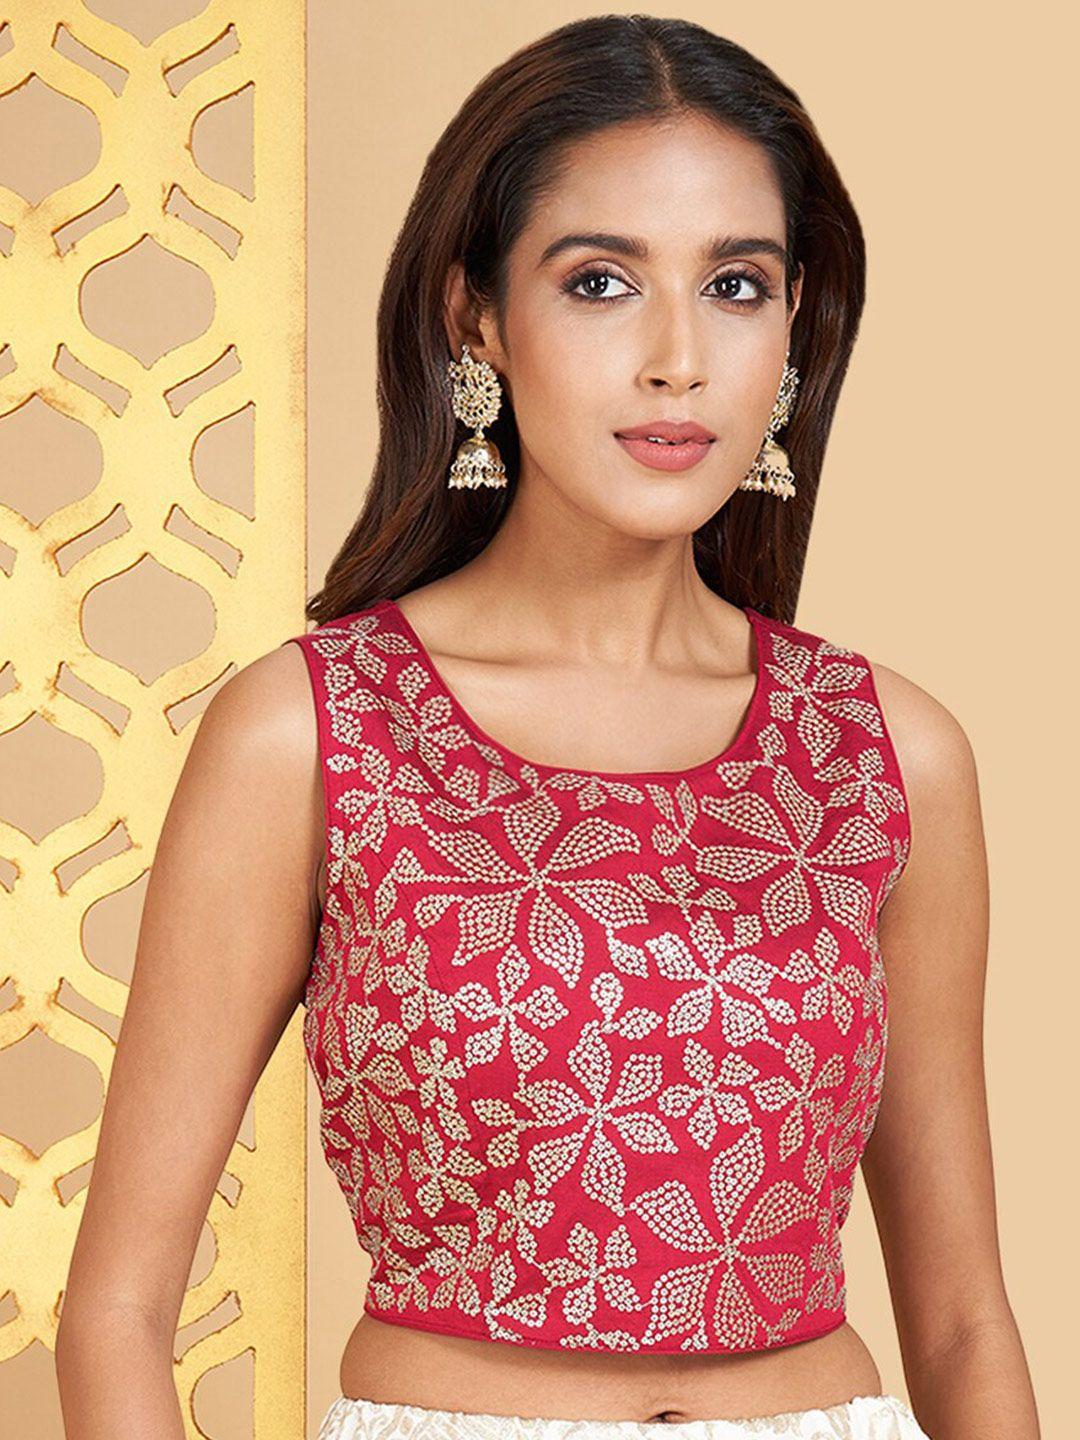 rangmanch by pantaloons floral printed sleeveless ethnic crop top